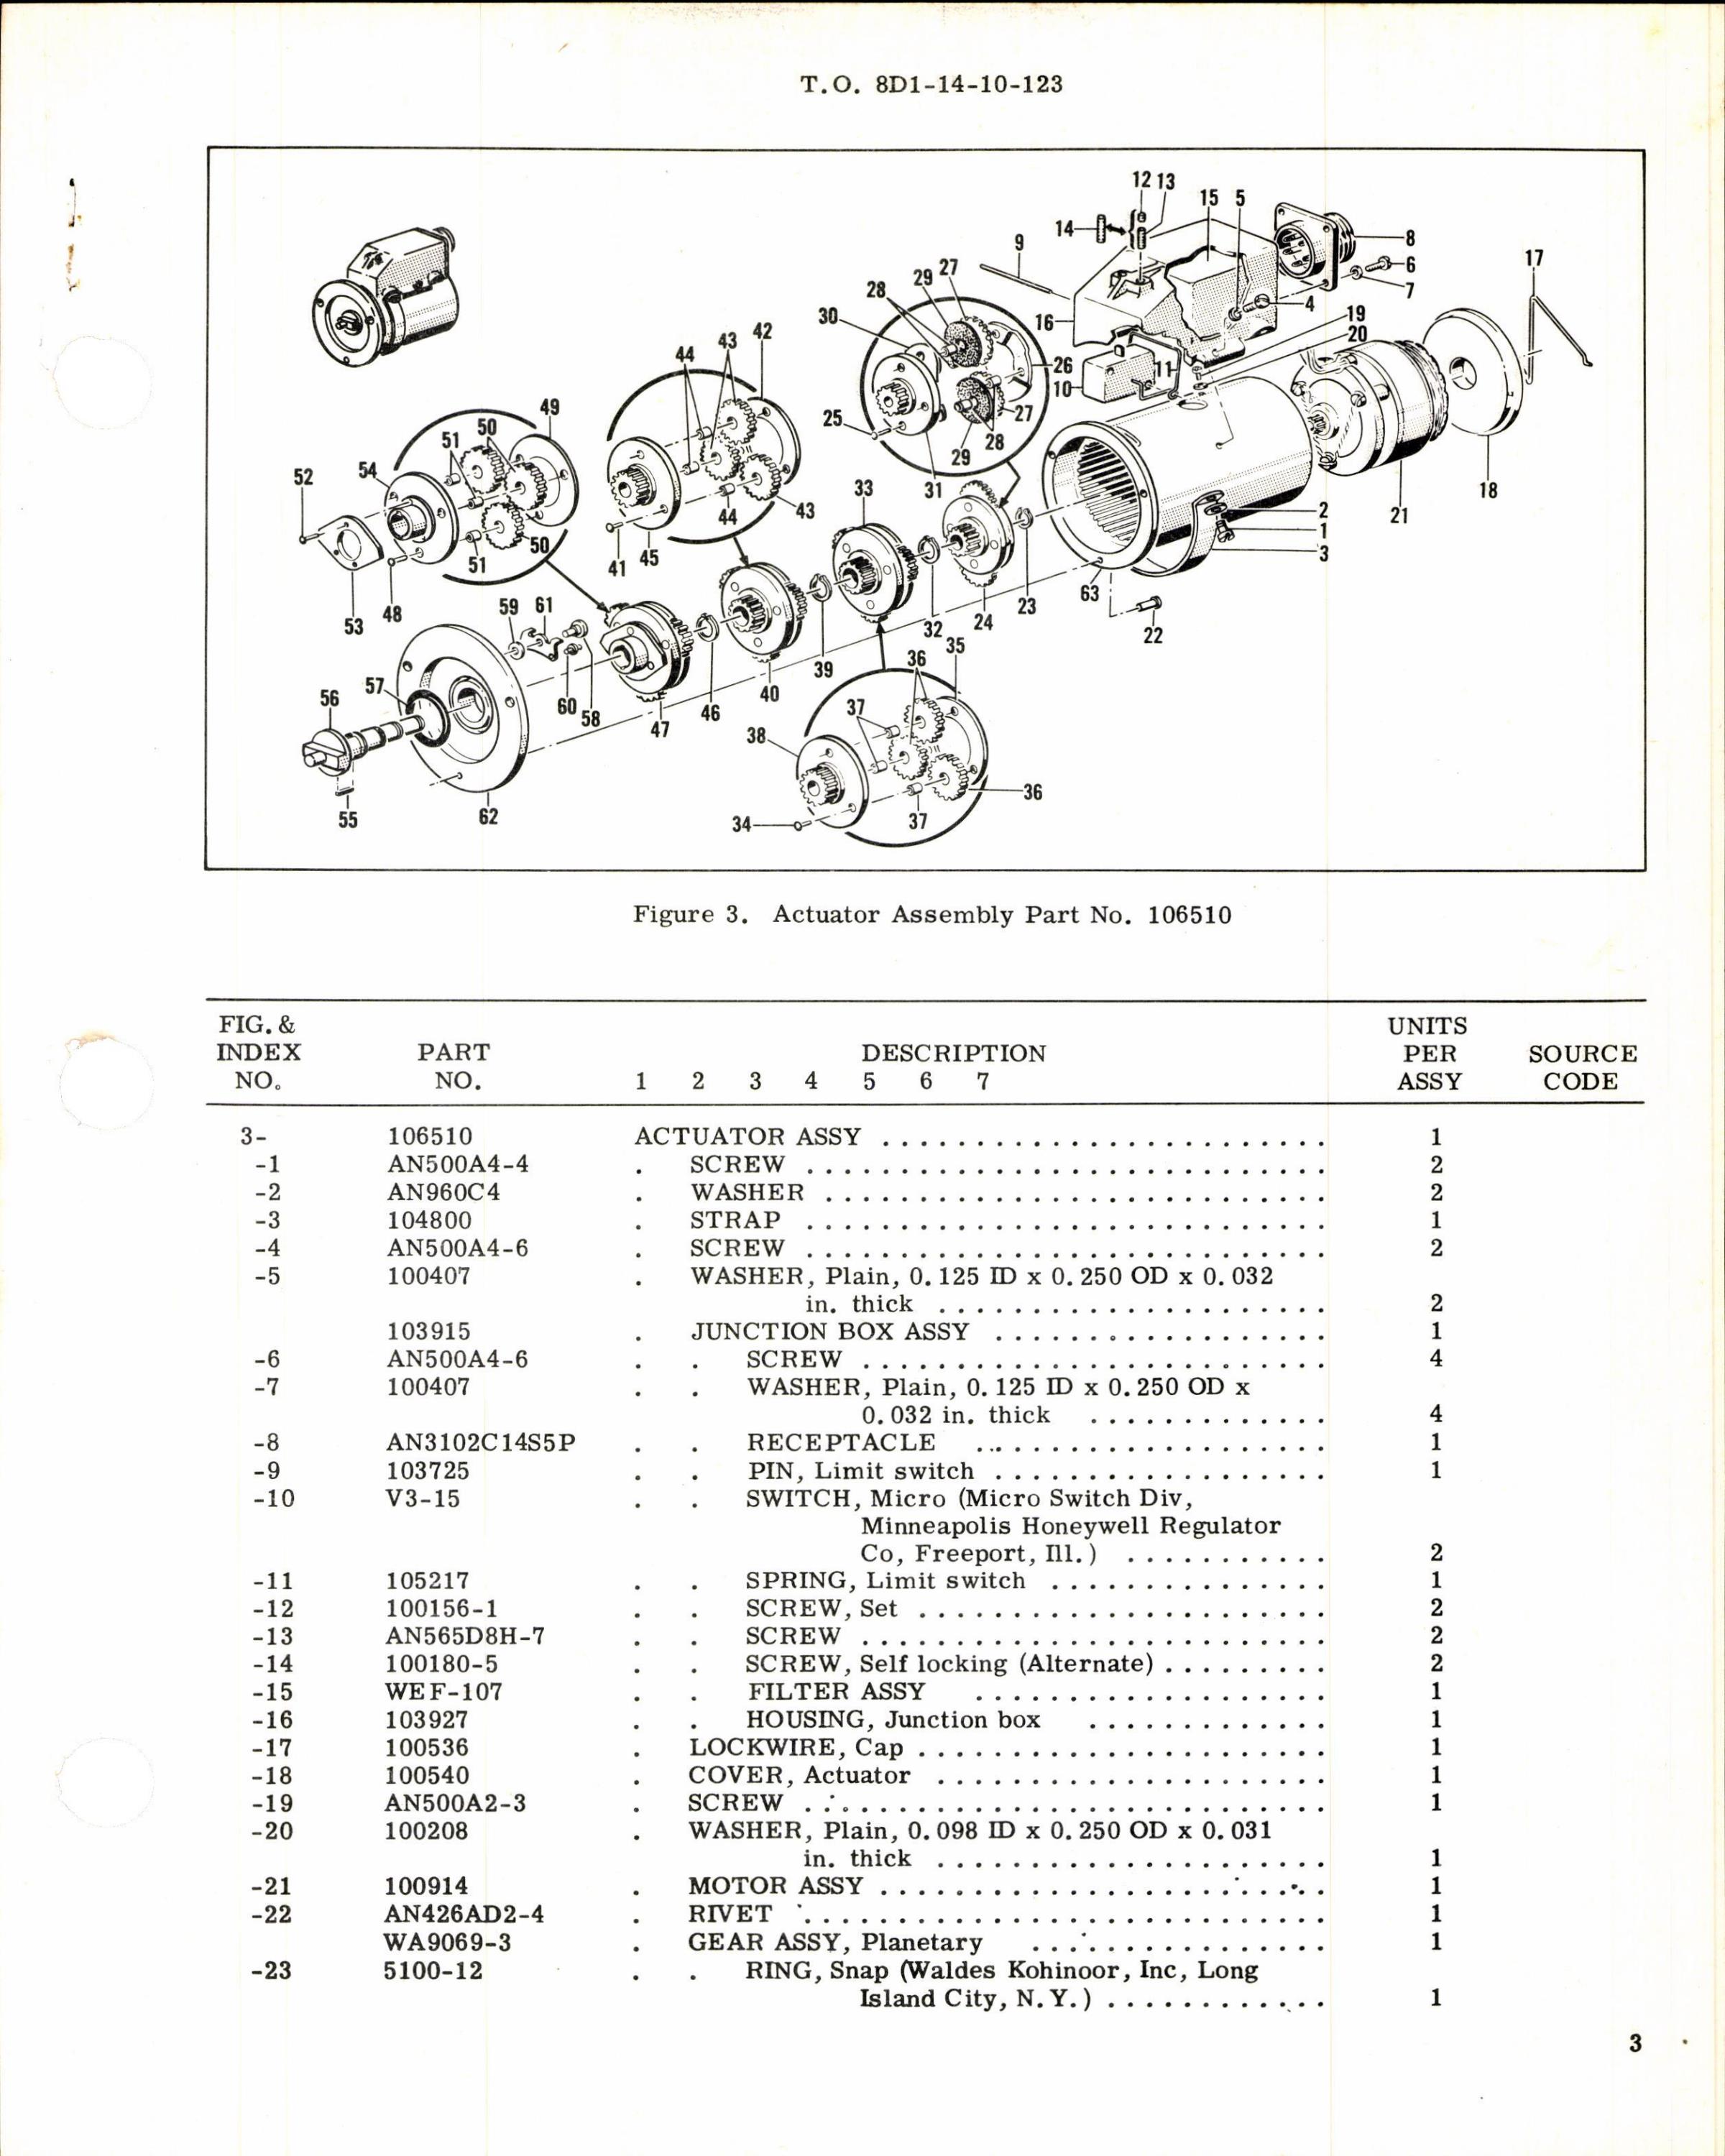 Sample page 3 from AirCorps Library document: Instructions w Parts Breakdown for Actuator Assembly Part 106510